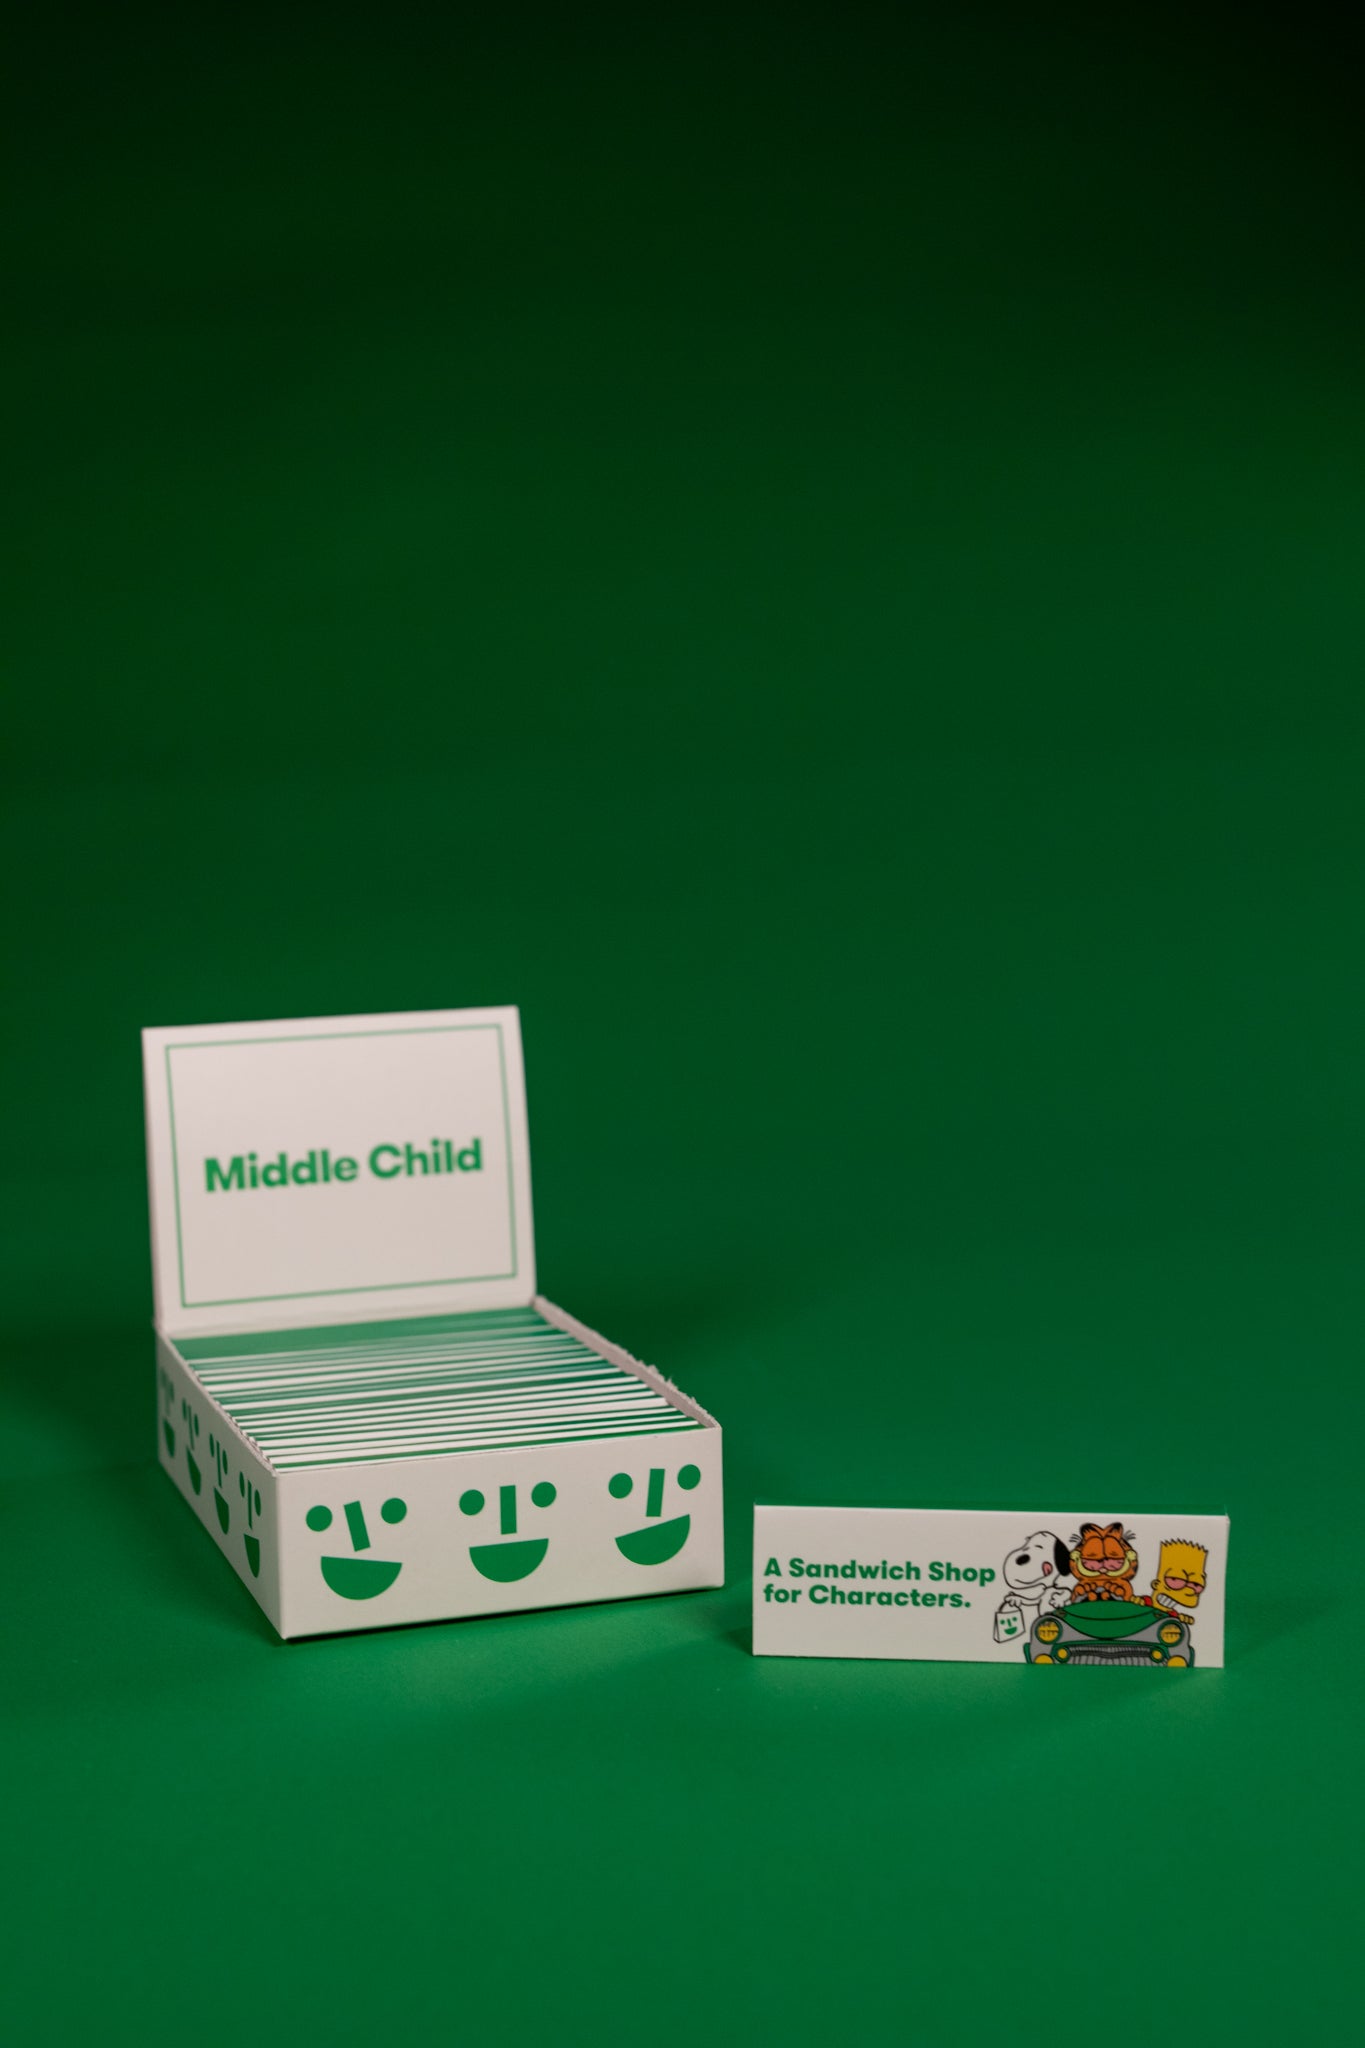 Middle Child “Characters” Rolling Papers